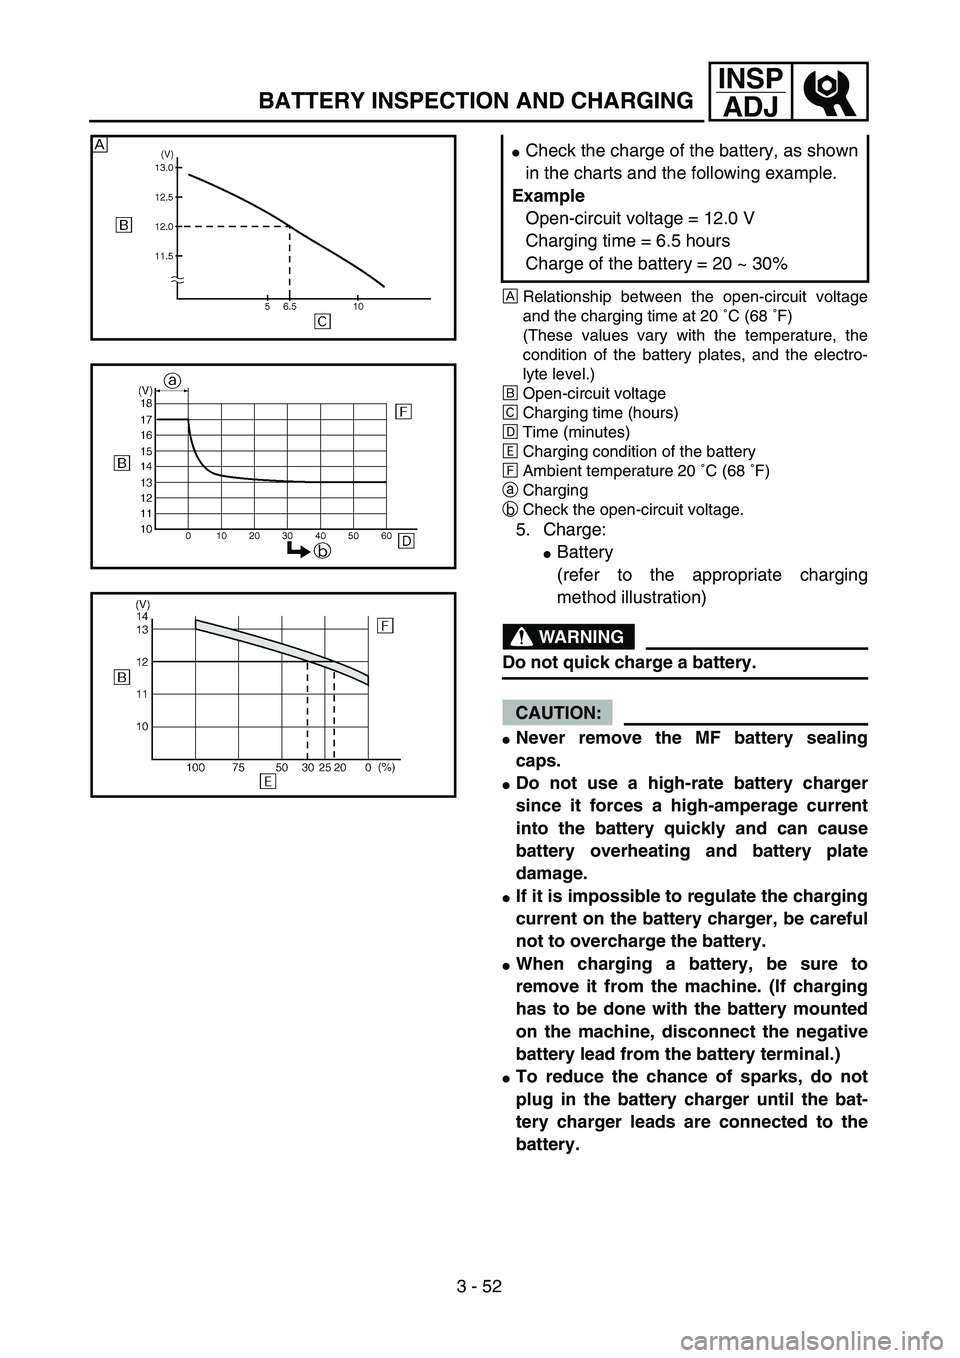 YAMAHA WR 450F 2004  Manuale de Empleo (in Spanish) 3 - 52
INSP
ADJ
BATTERY INSPECTION AND CHARGING
ÅRelationship between the open-circuit voltage
and the charging time at 20 ˚C (68 ˚F)
(These values vary with the temperature, the
condition of the b